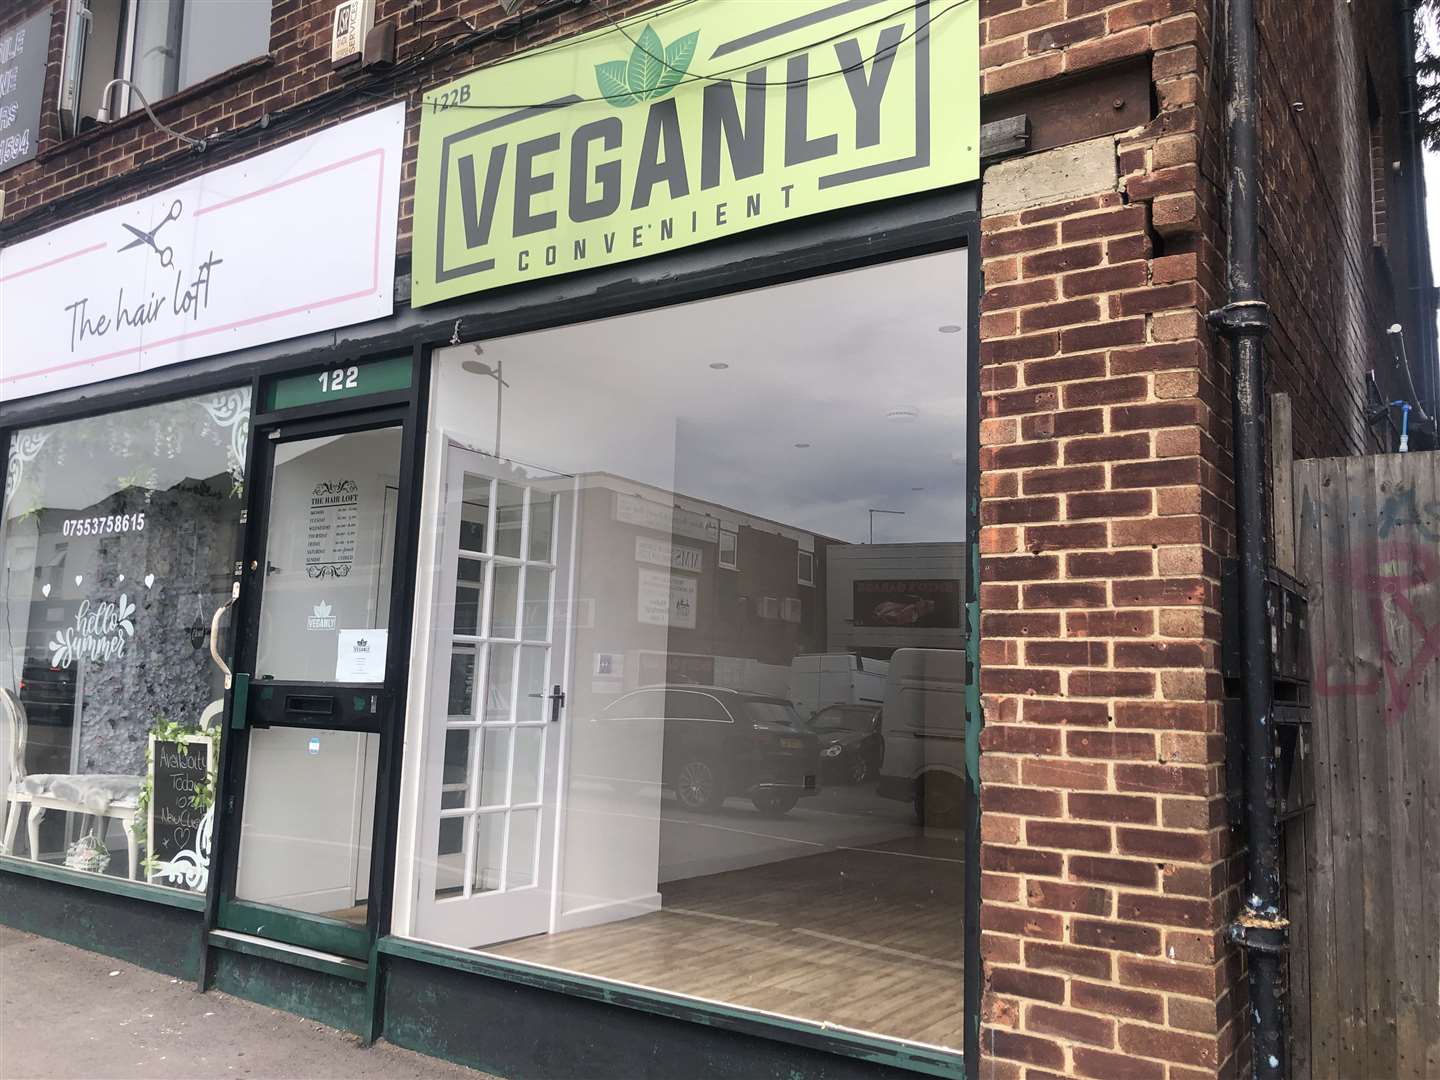 An empty Veganly Convenient in Strood High Street